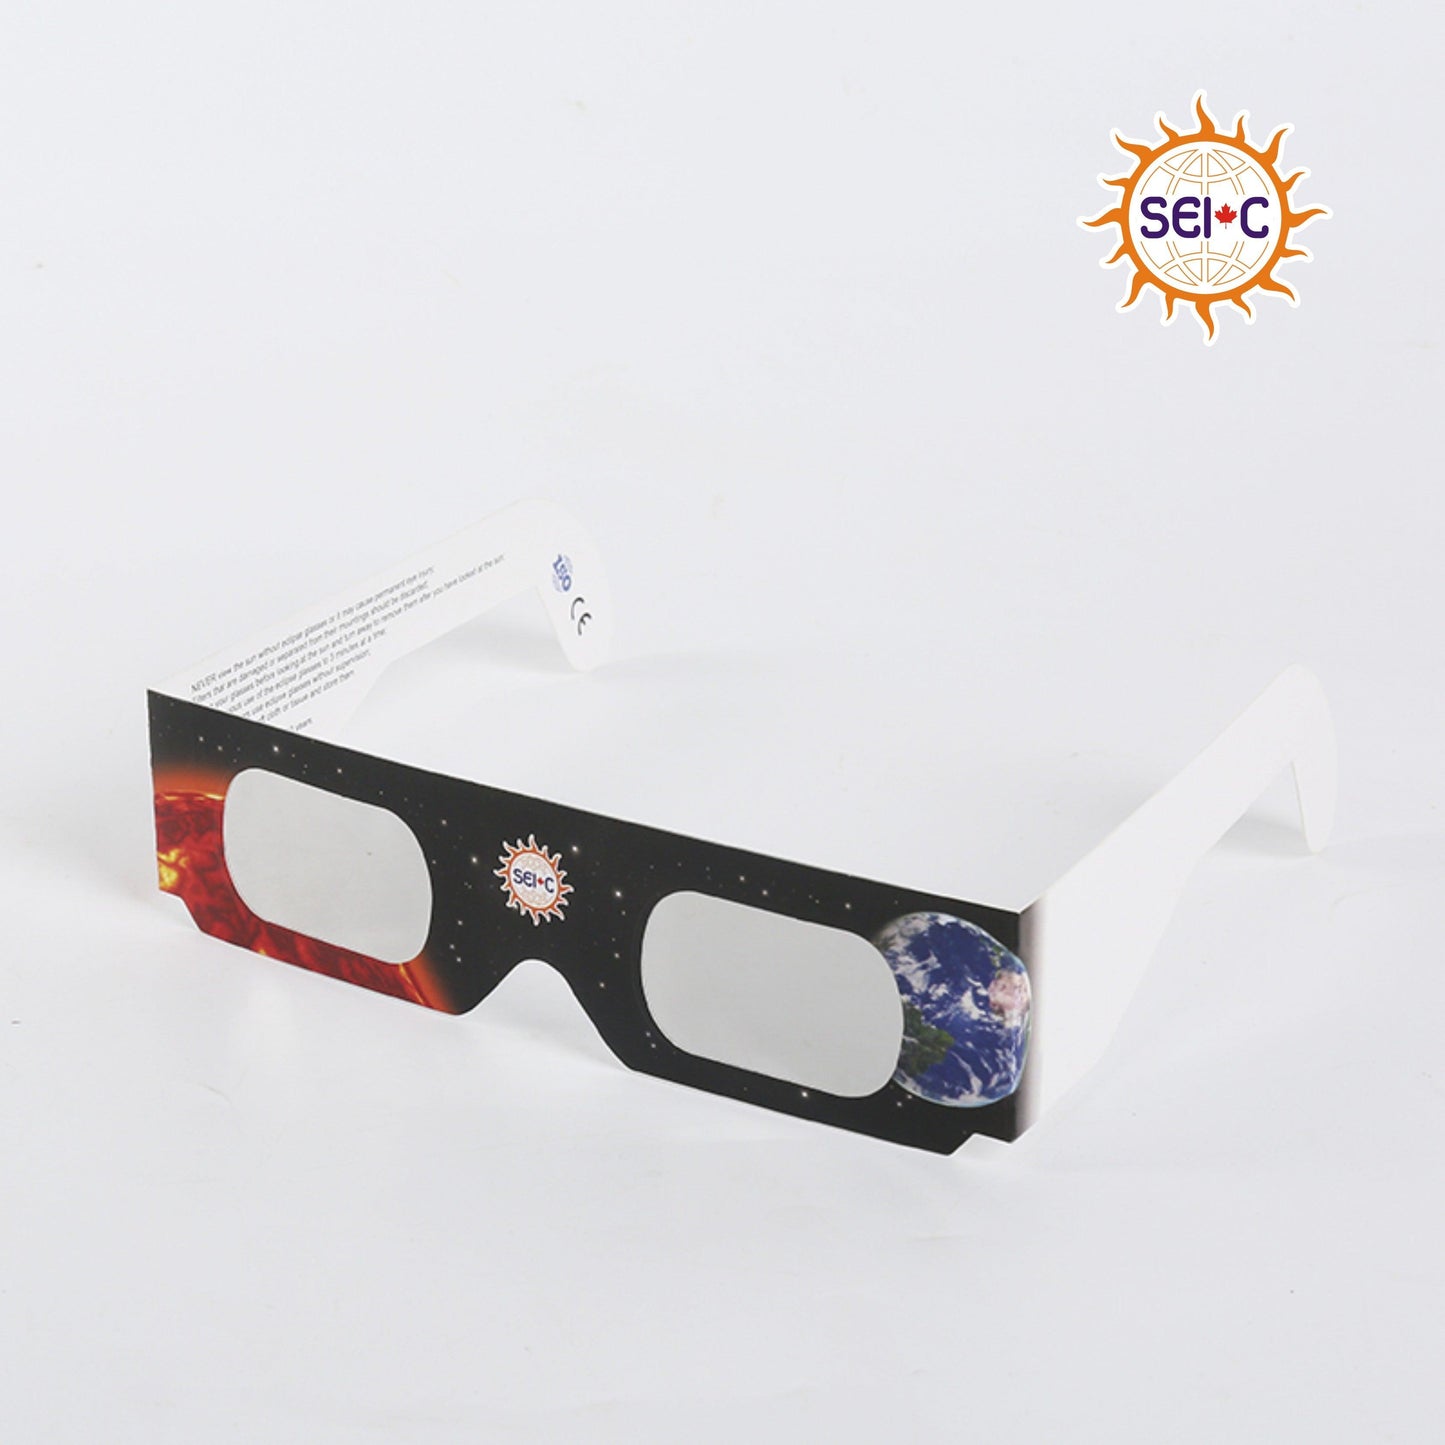 SEIC Bundle of 3 Print Designs Paper Solar Eclipse Glasses, CE and ISO Certified Safe Eclipse Shade for Direct Sun Viewing (Pack of 12) solar eclipse glasses Solar Eclipse International 